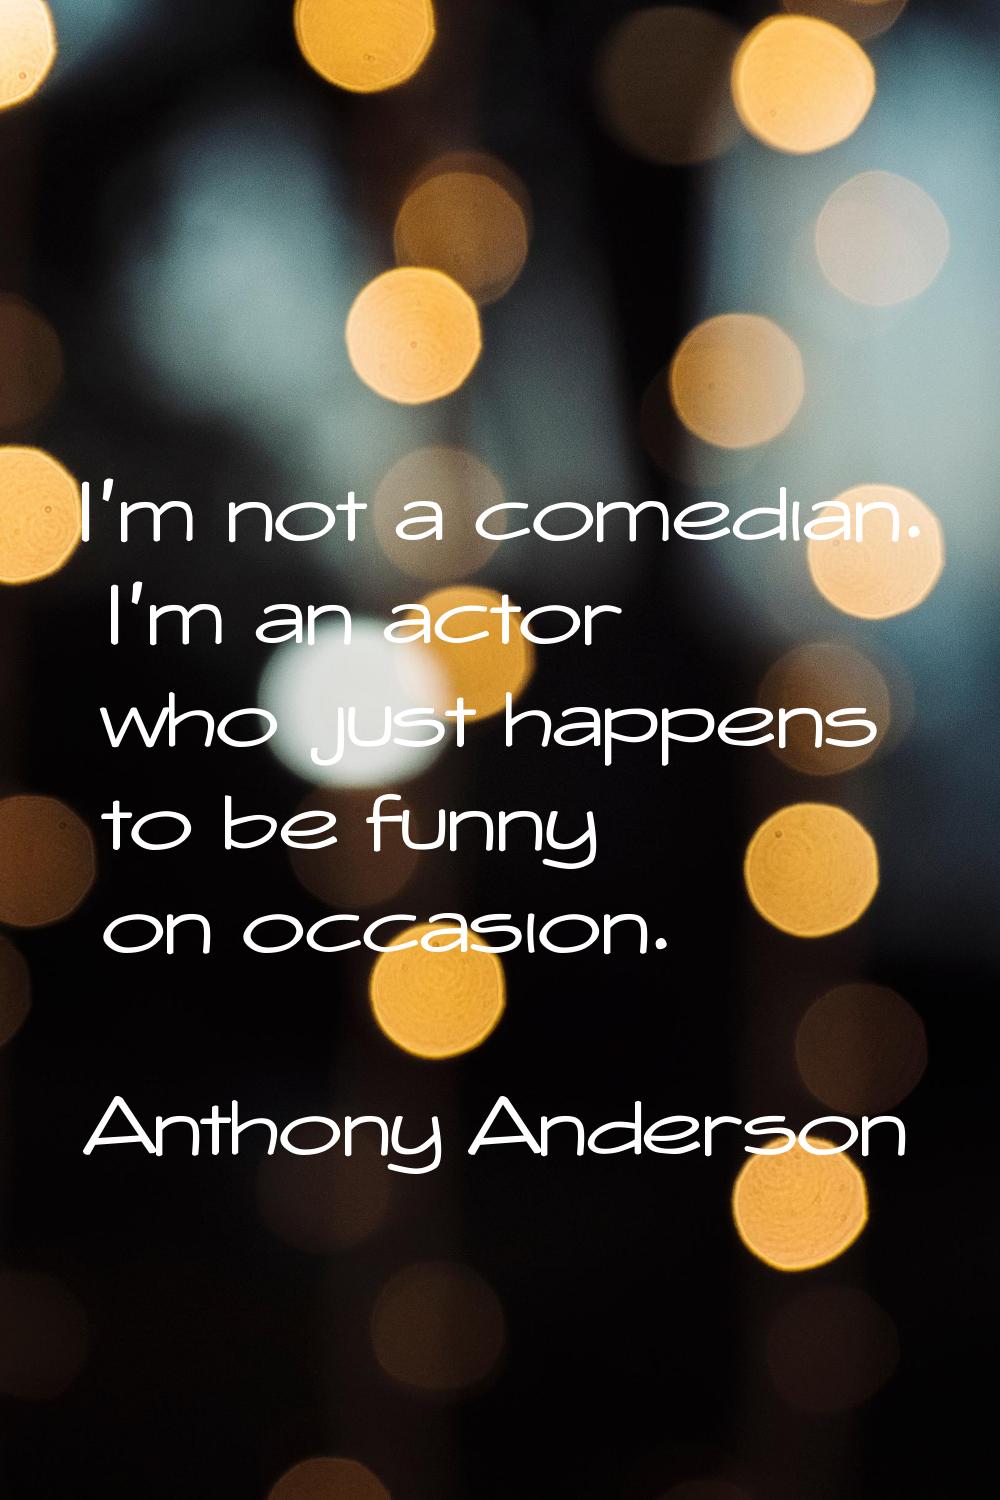 I'm not a comedian. I'm an actor who just happens to be funny on occasion.